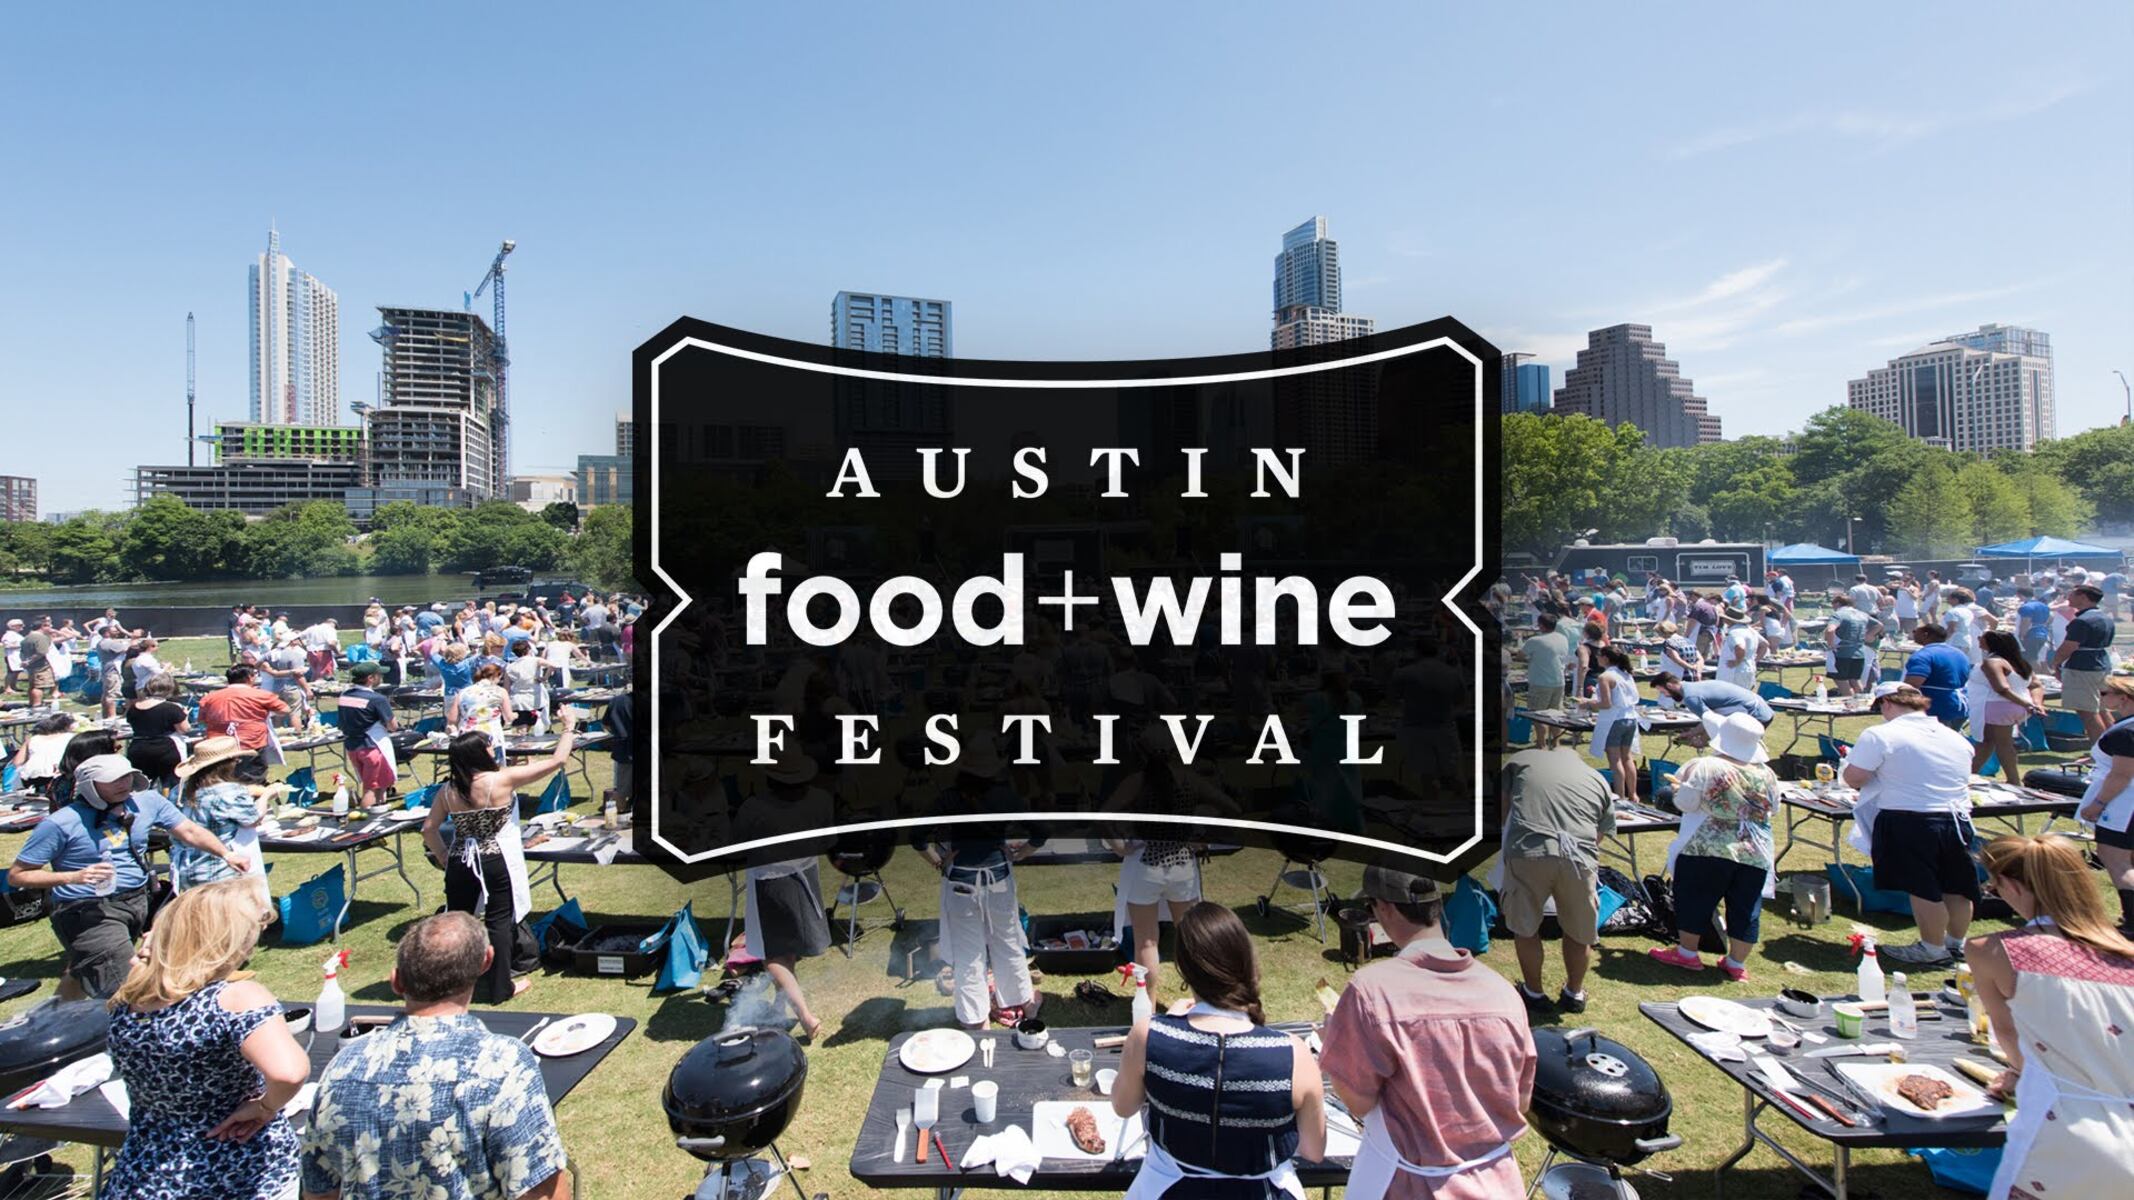 15 Facts About Austin Food + Wine Festival